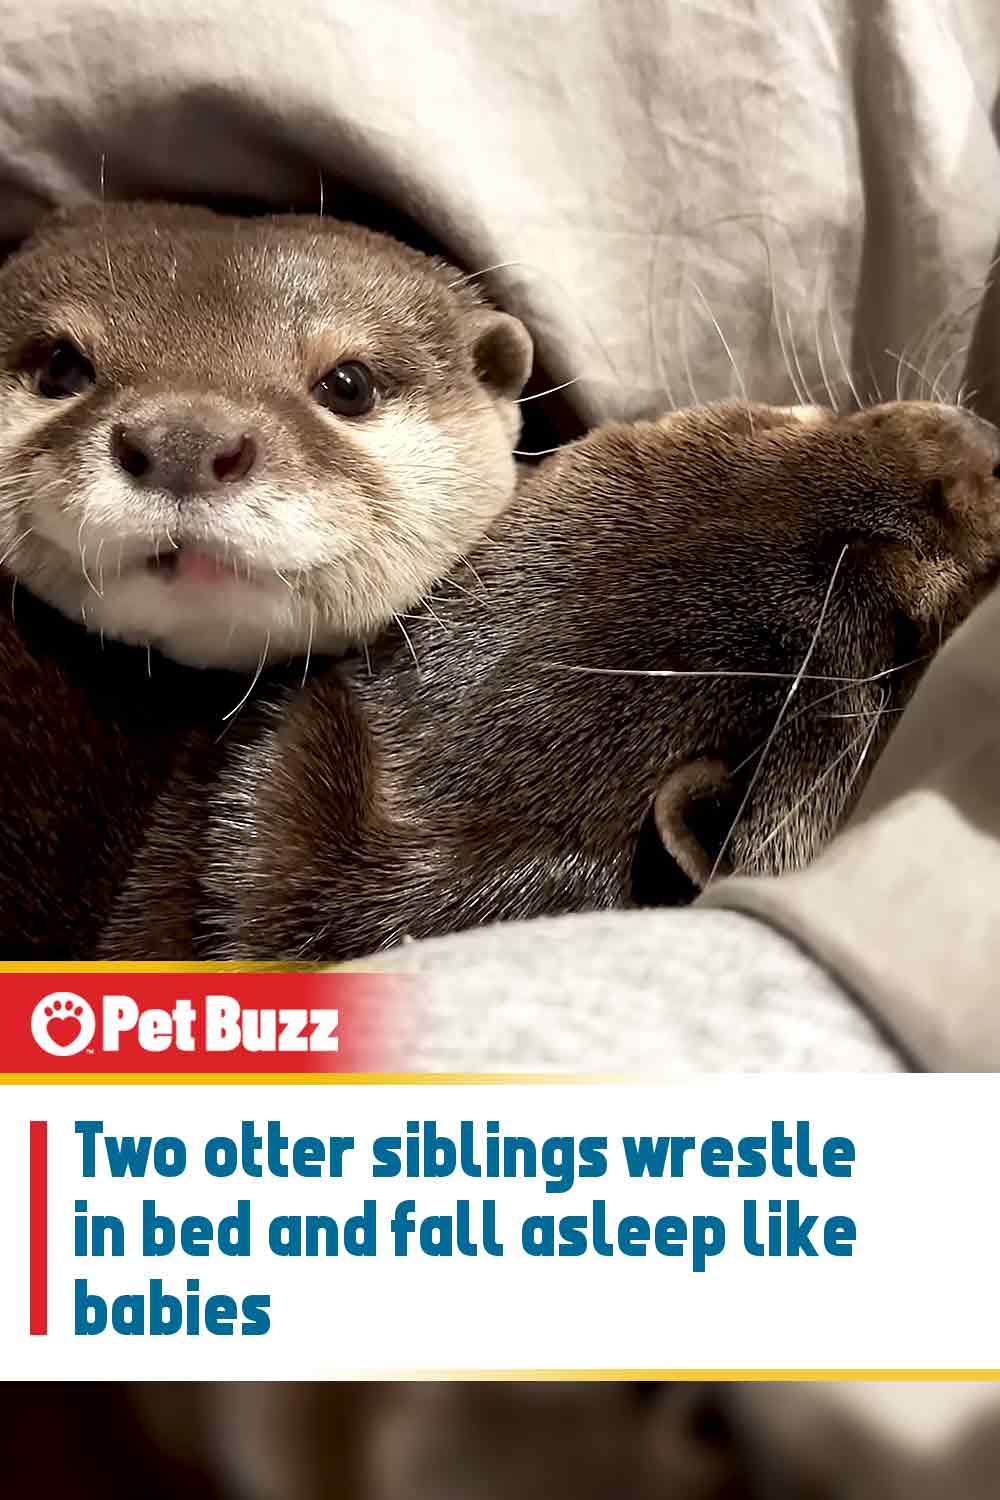 Two otter siblings wrestle in bed and fall asleep like babies